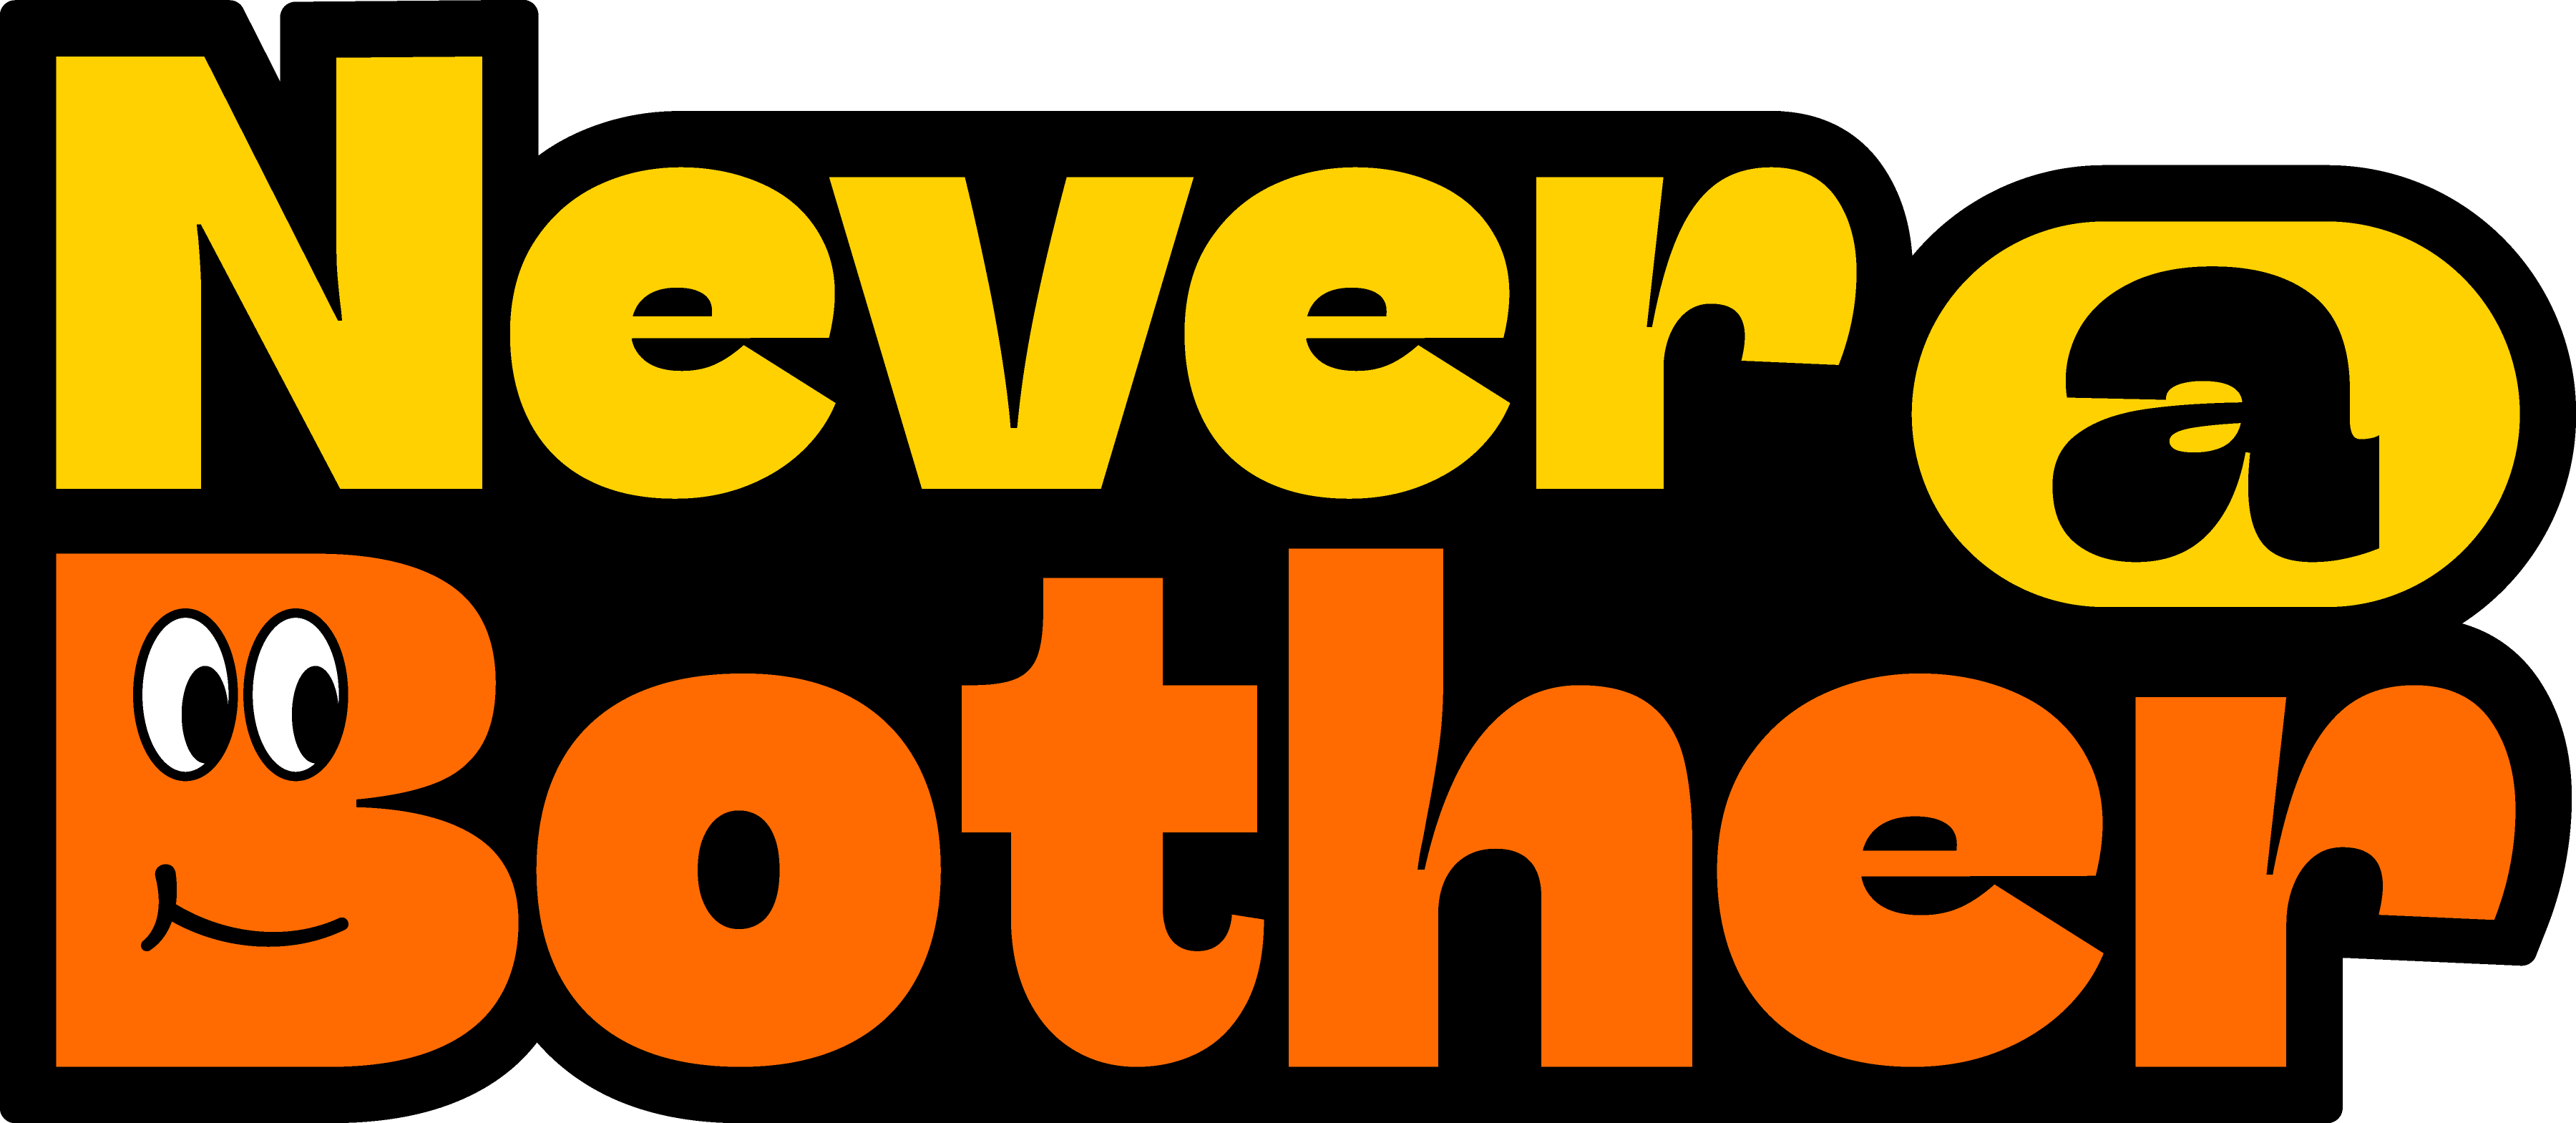 Visit the Never a Bother website at neverabother.org